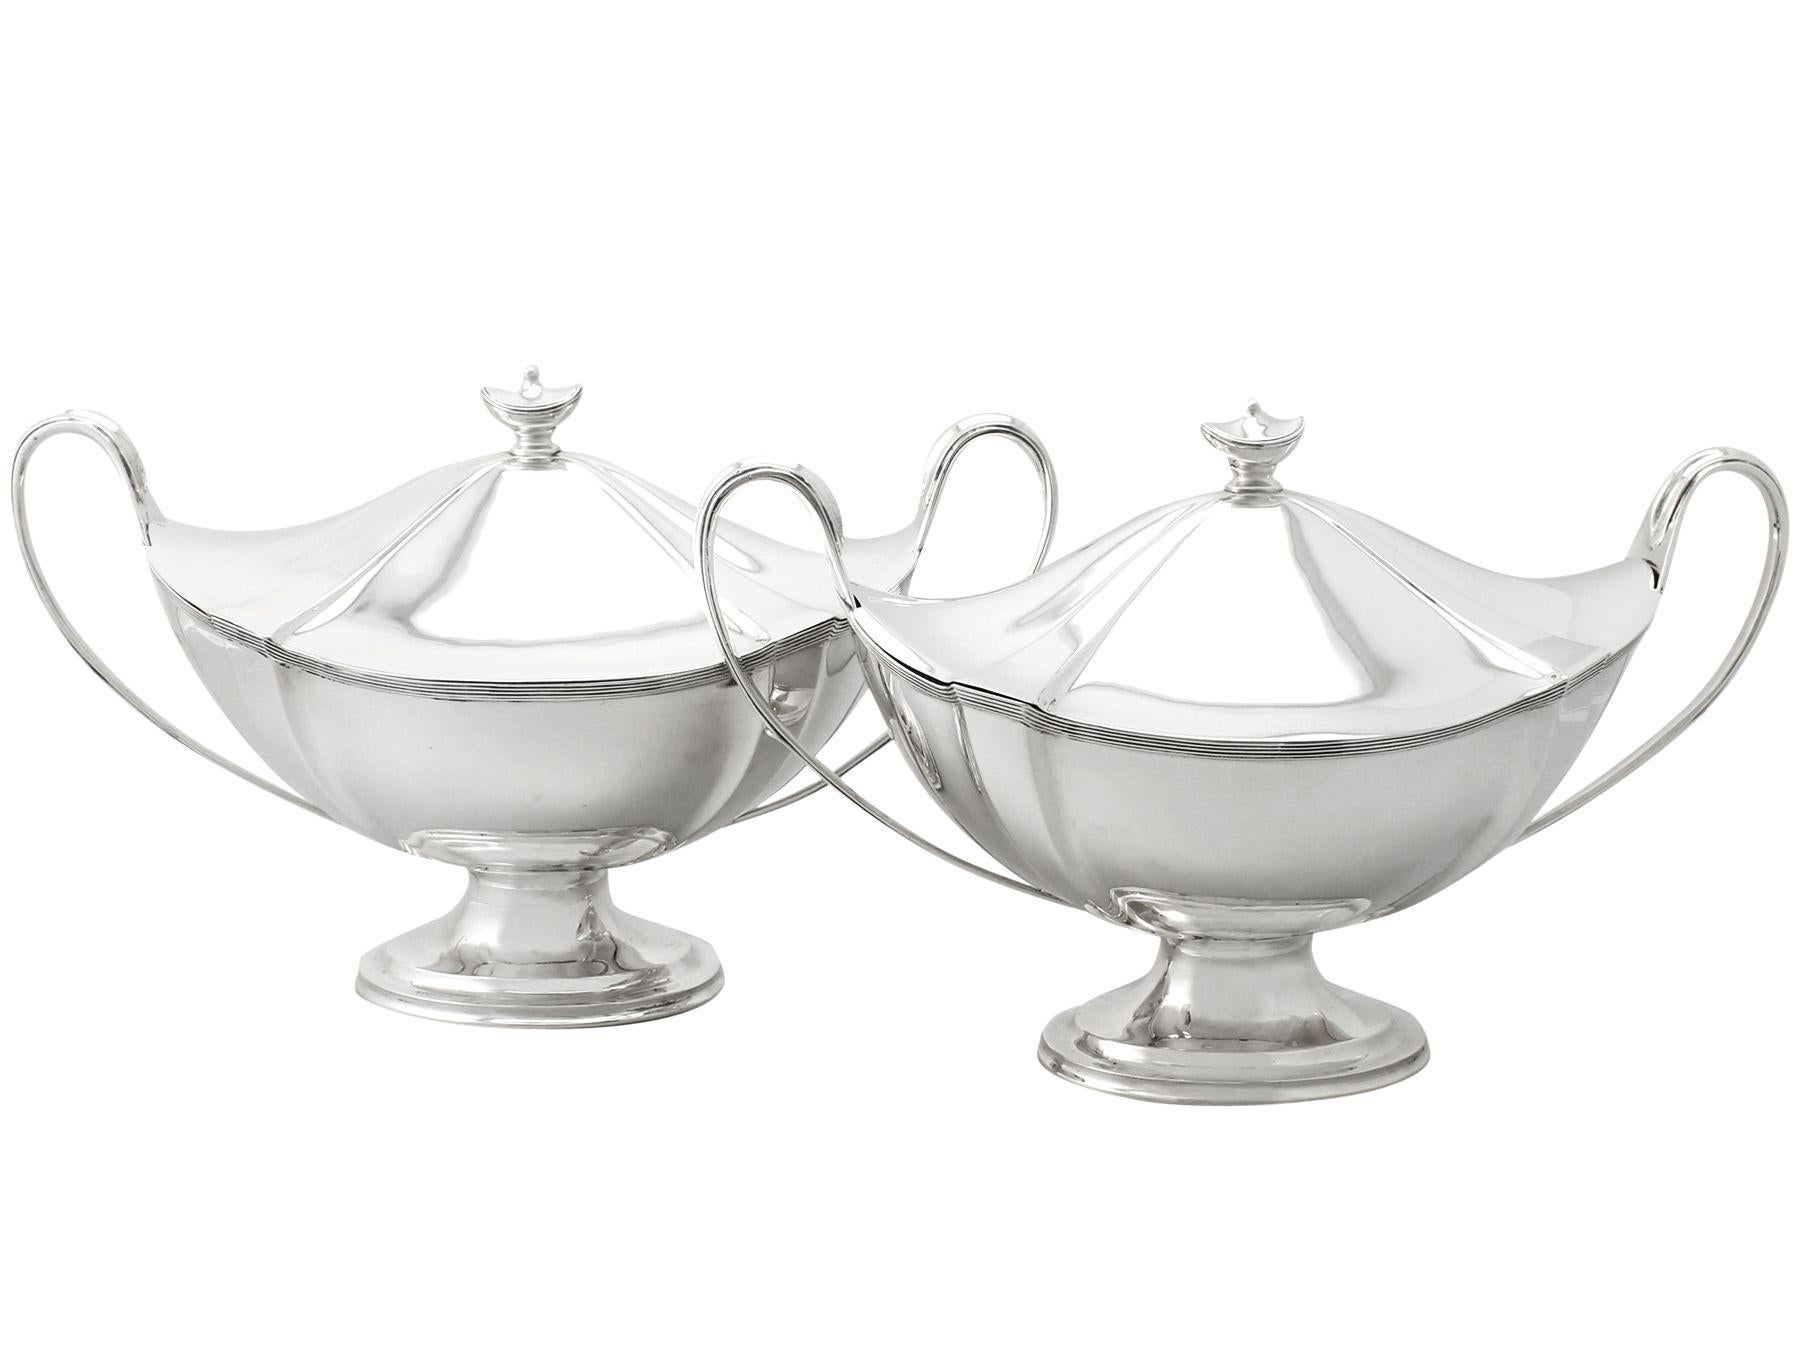 An exceptional, fine and impressive pair of antique Edwardian English sterling silver soup tureens in the Adams style; part of our dining silverware collection

These exceptional Edwardian sterling silver soup tureens have an oval Adams style form